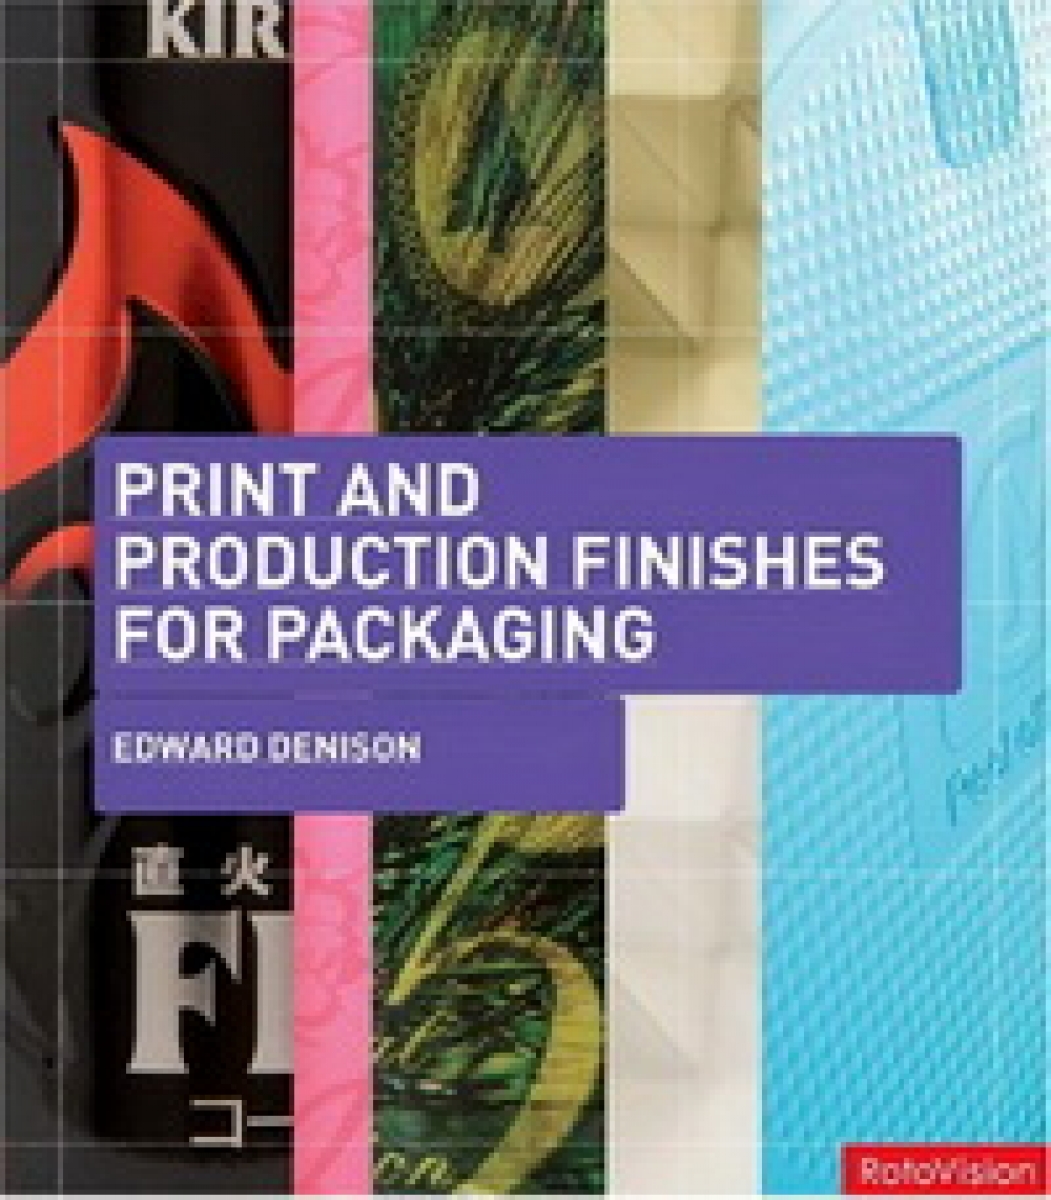 Edward D. Print and Production Finishes for Packaging 